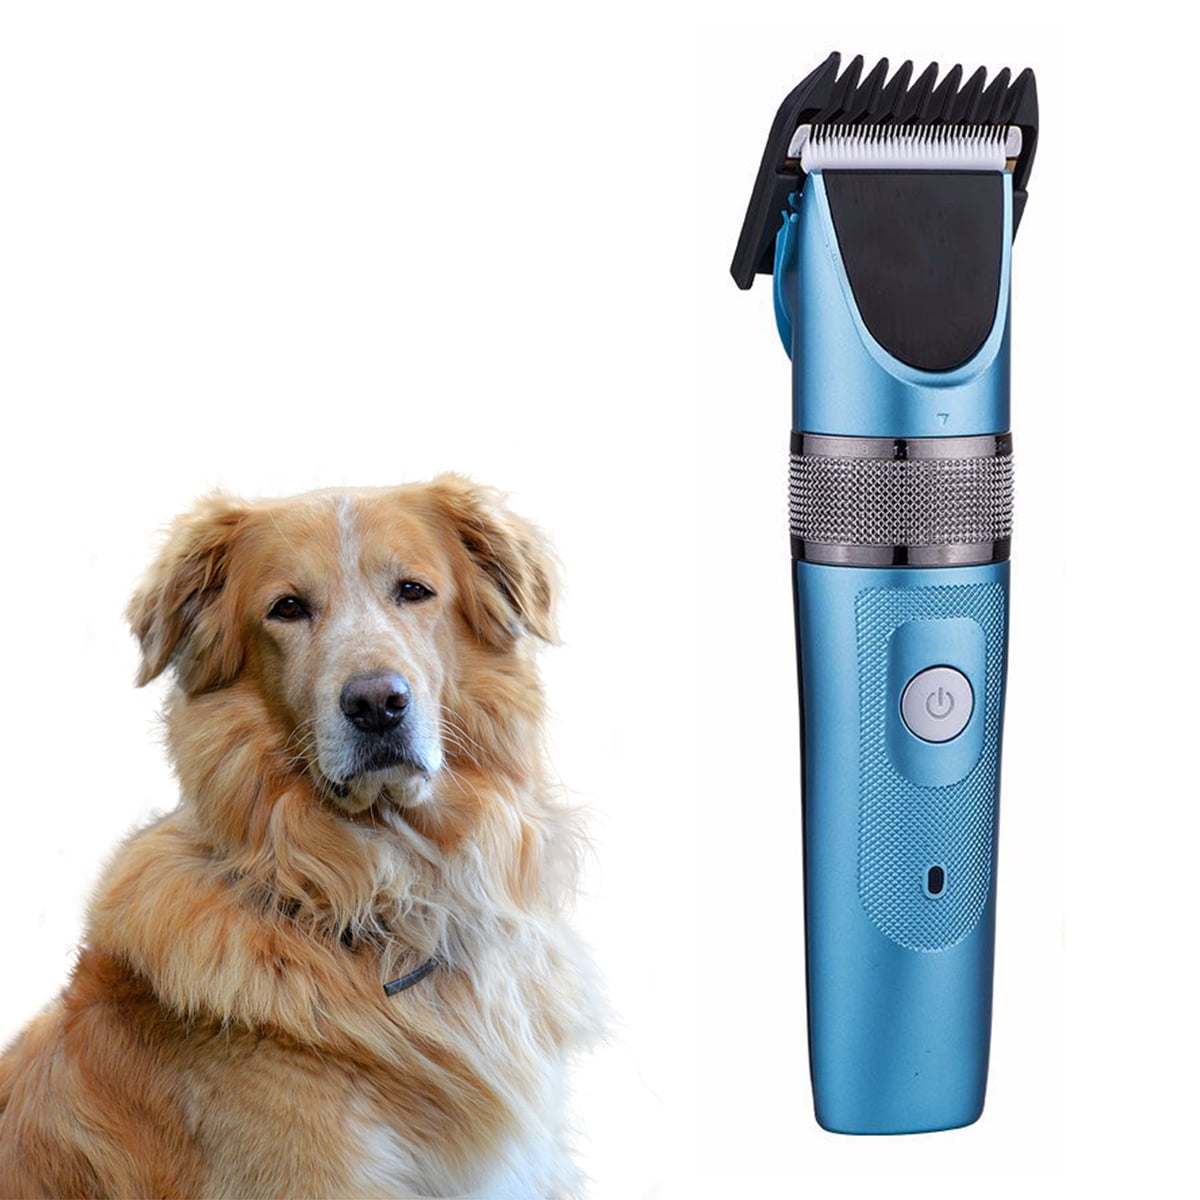 electric shaver for dogs